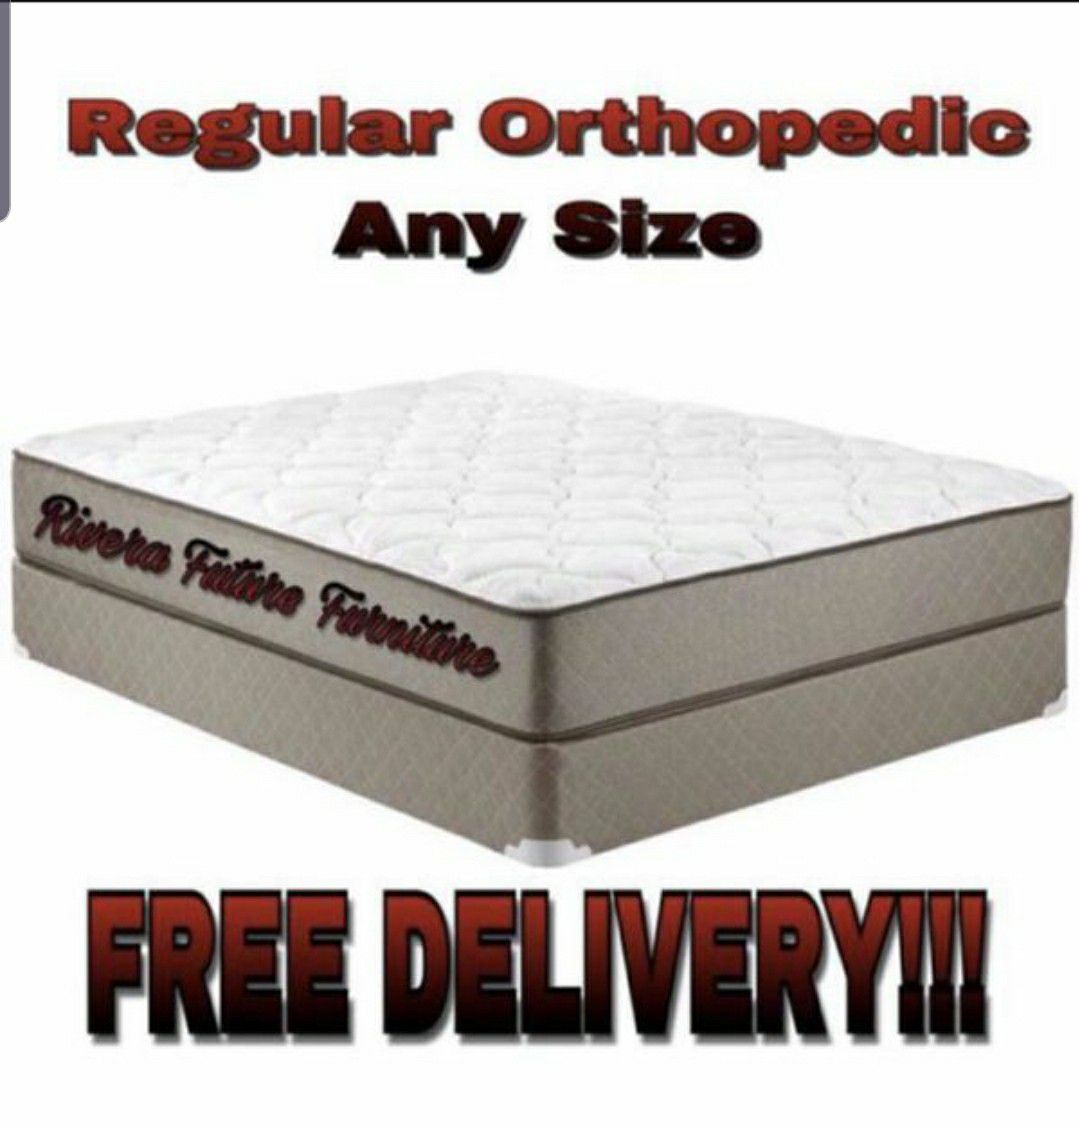 Delivery free new Mattress in the plastic available financial